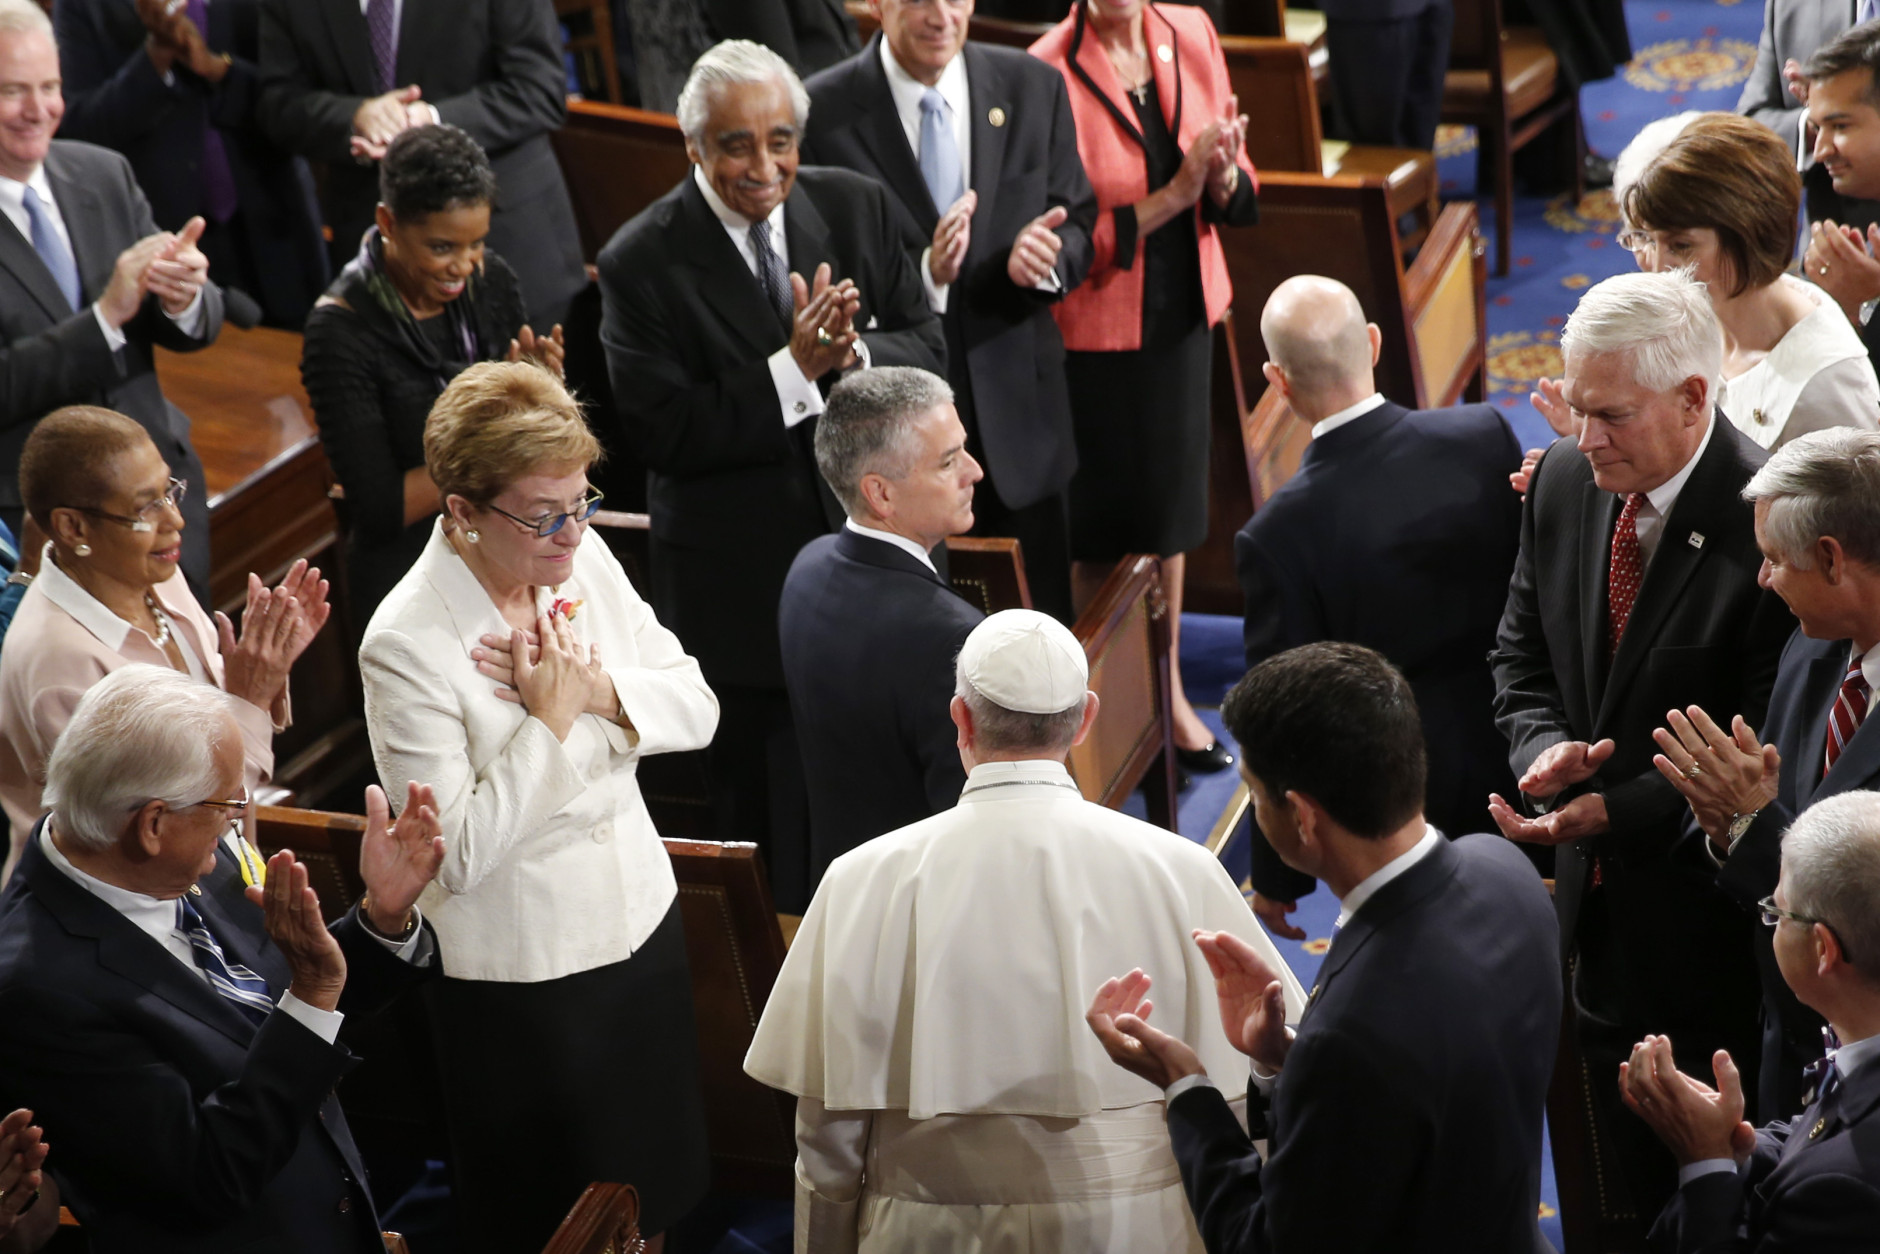 Pope Francis is applauded as he arrives on Capitol Hill  in Washington, Thursday, Sept. 24, 2015, to address a joint meeting of Congress, making history as the first pontiff to do so. (AP Photo/Carolyn Kaster)